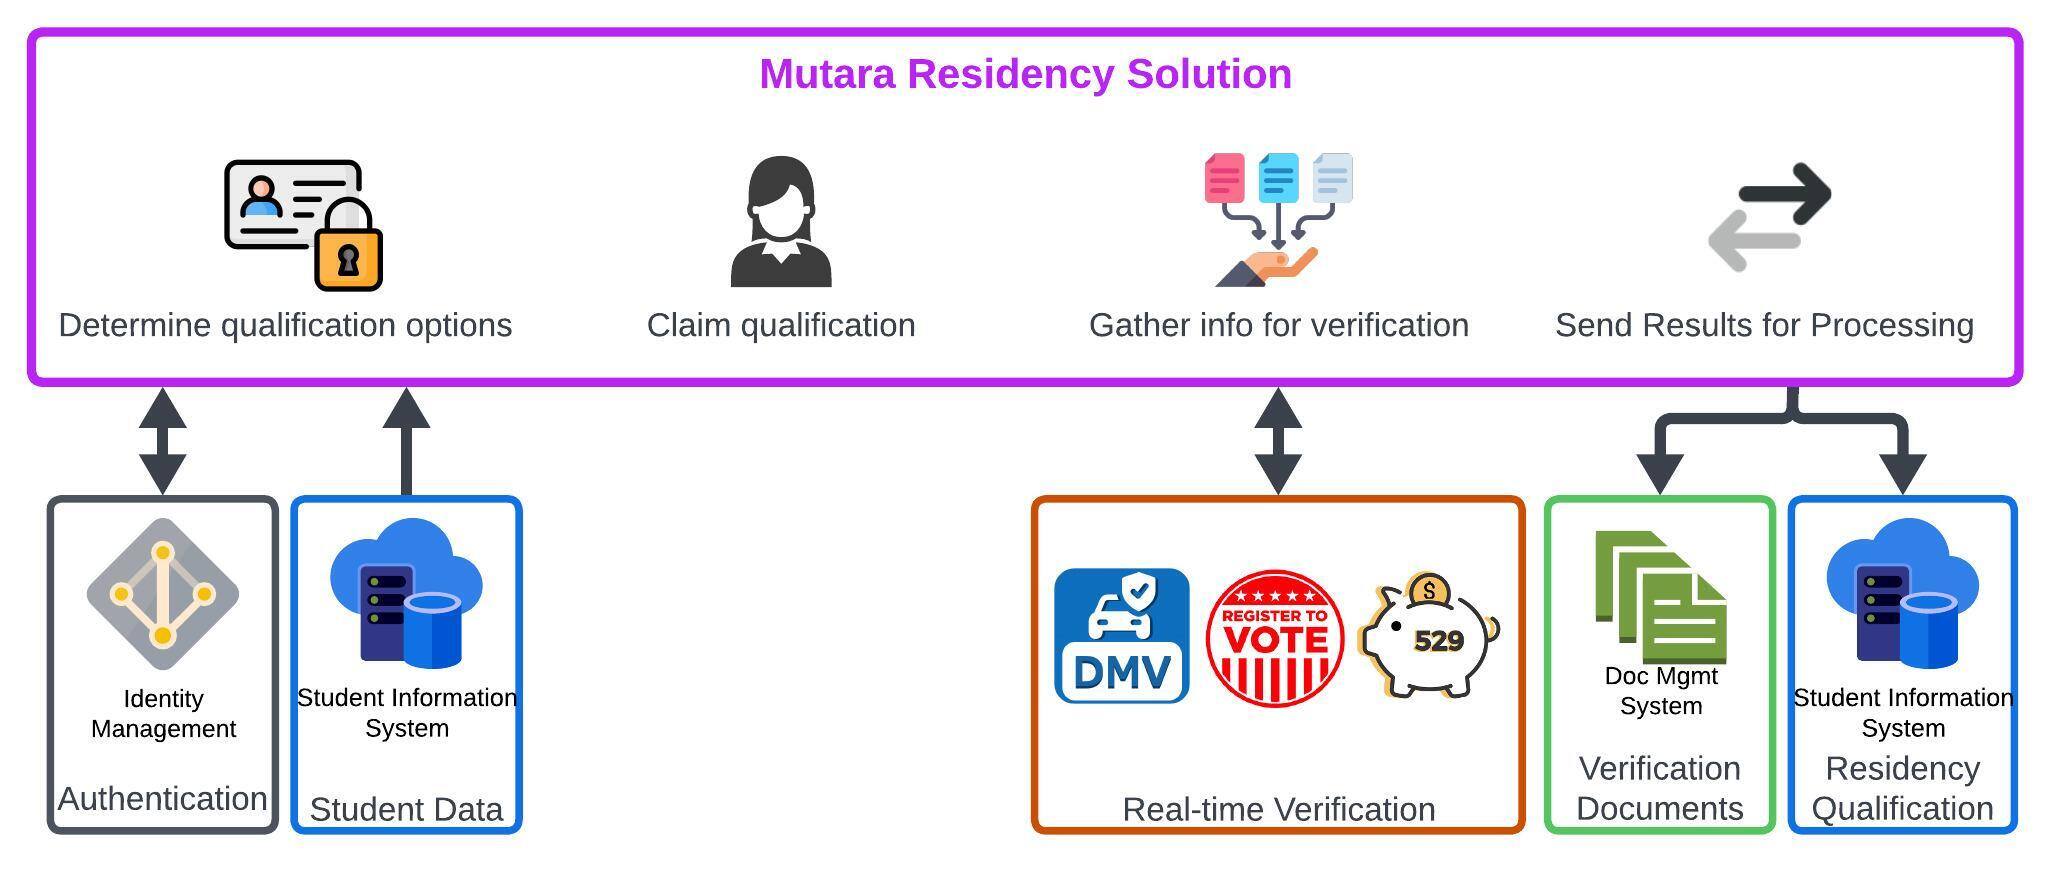 Architecture diagram for Mutara's residency solution